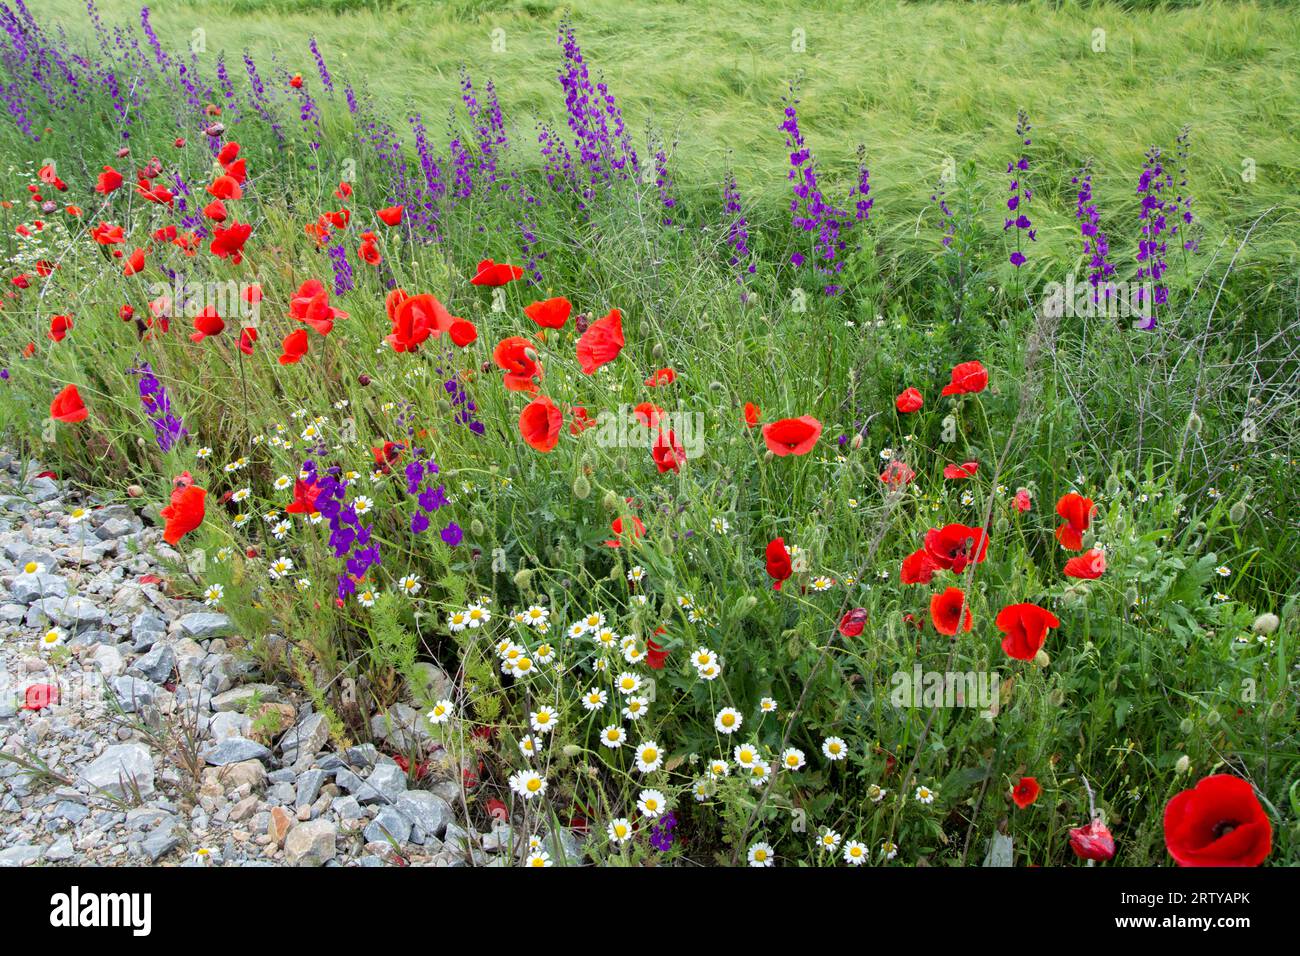 Purple larkspurр, small white chamomile and red poppy flowers blooming in early summer in a field close to the road in Bulgaria. Horizontal image with Stock Photo